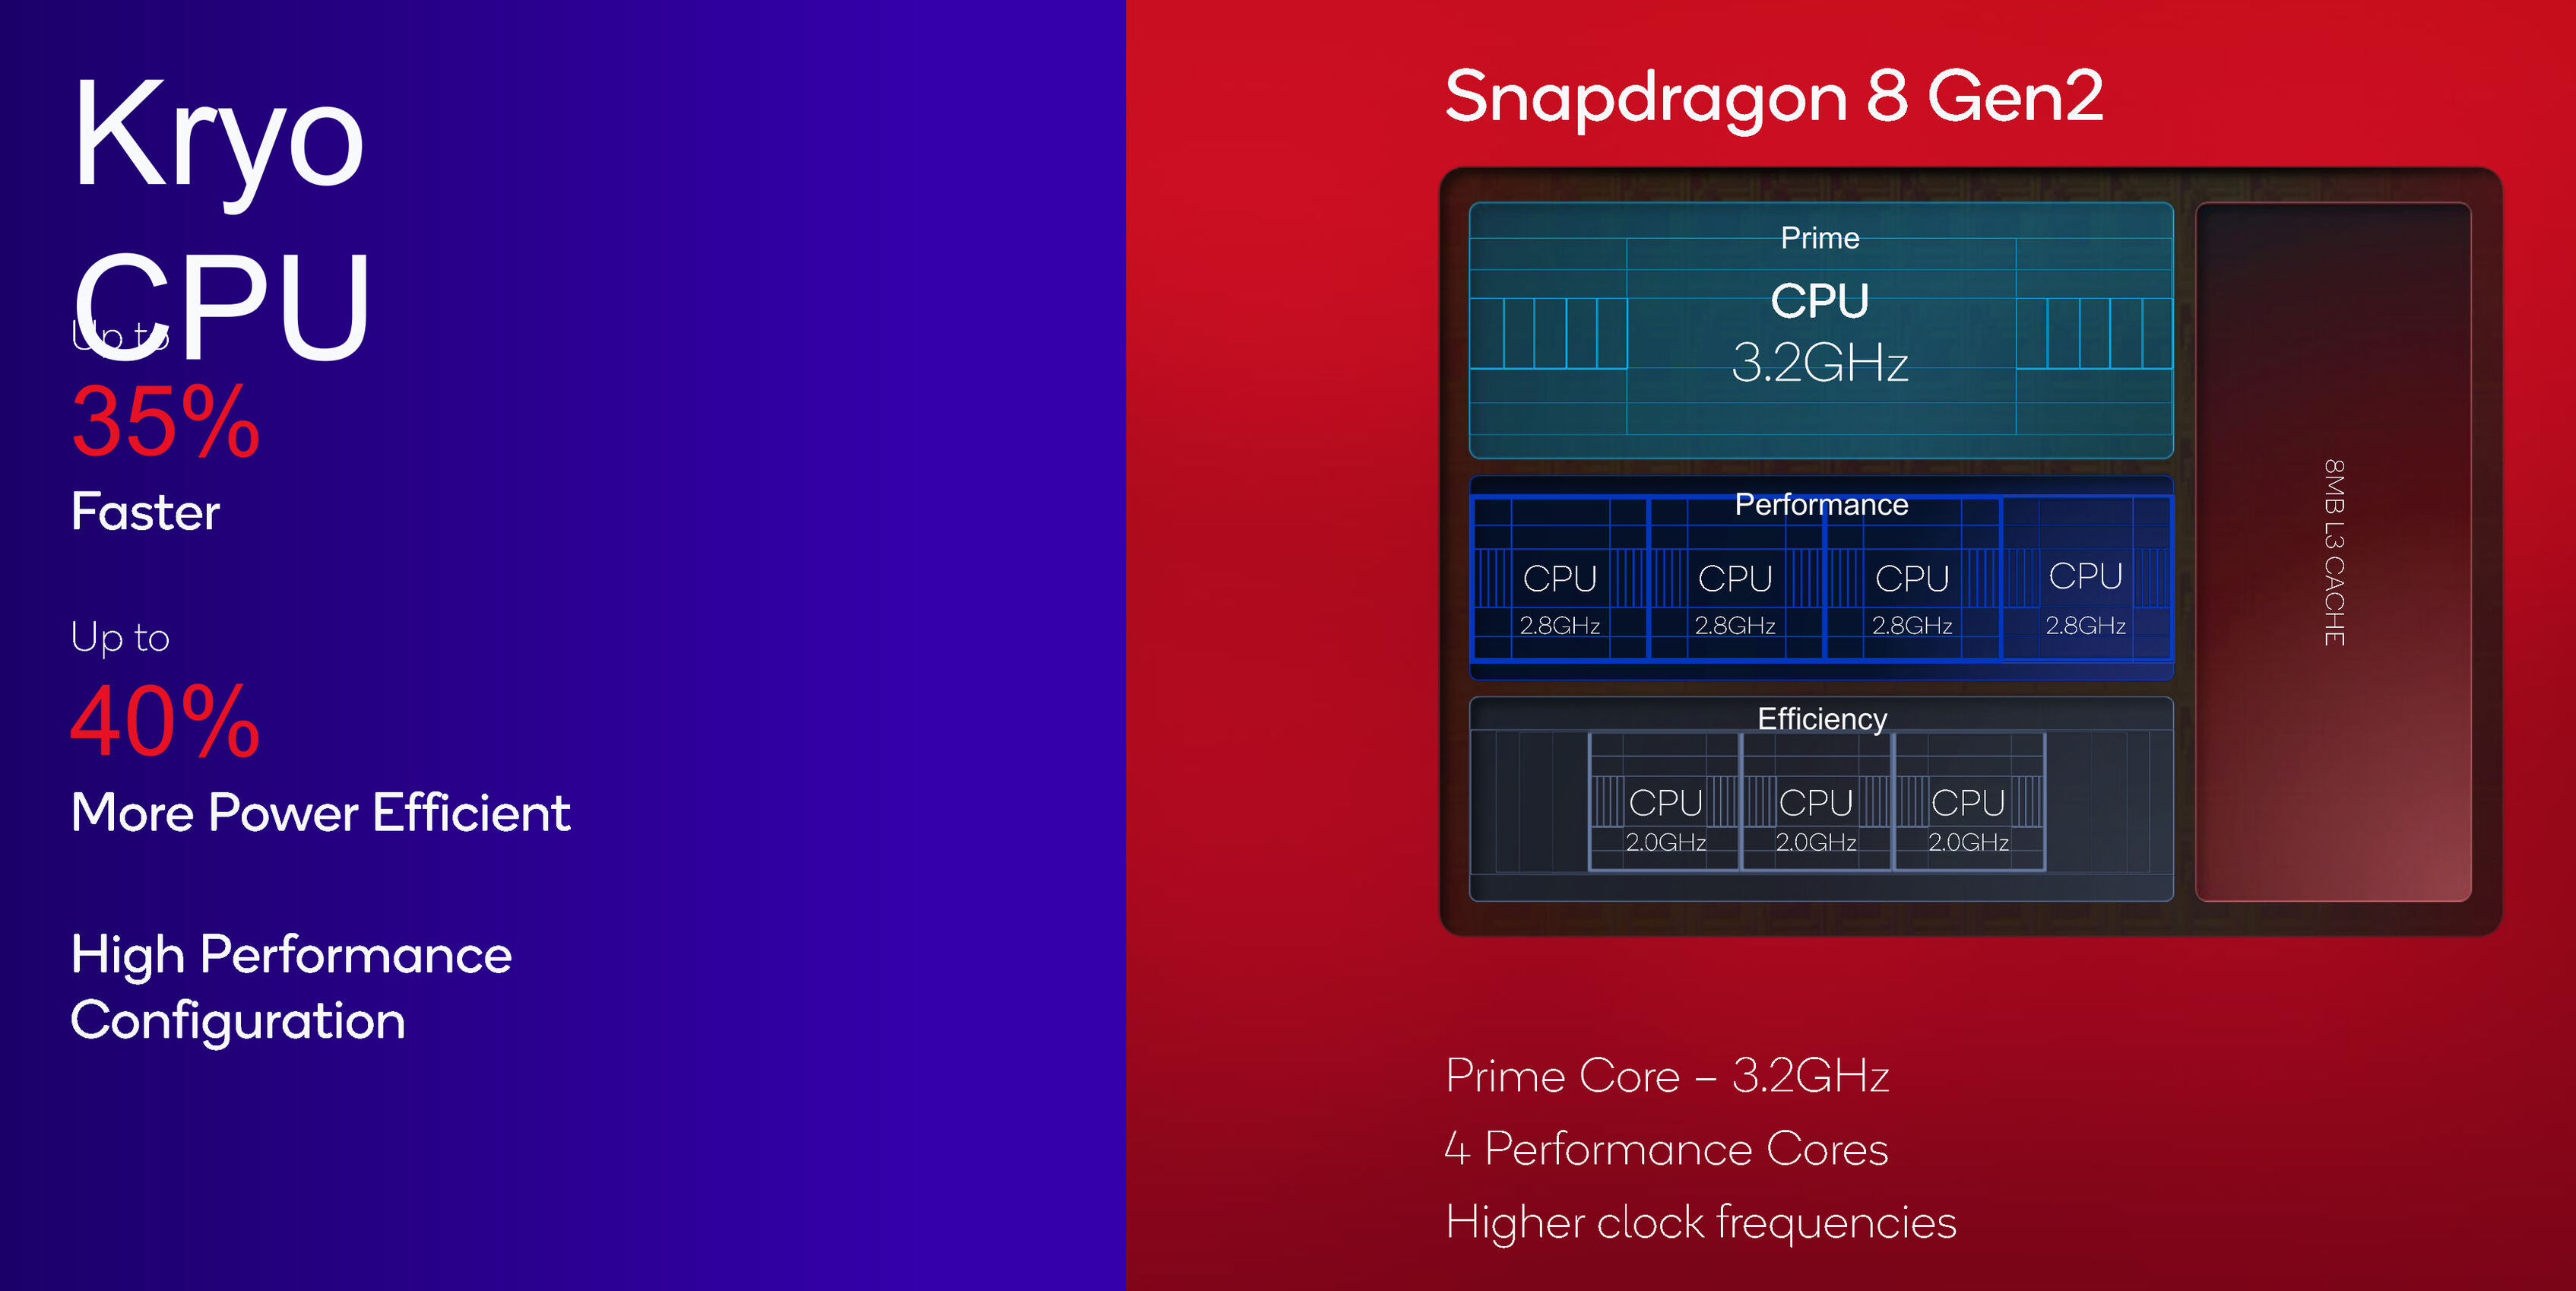 Qualcomm Snapdragon 8 Gen 2 Processor - Benchmarks and Specs -   Tech